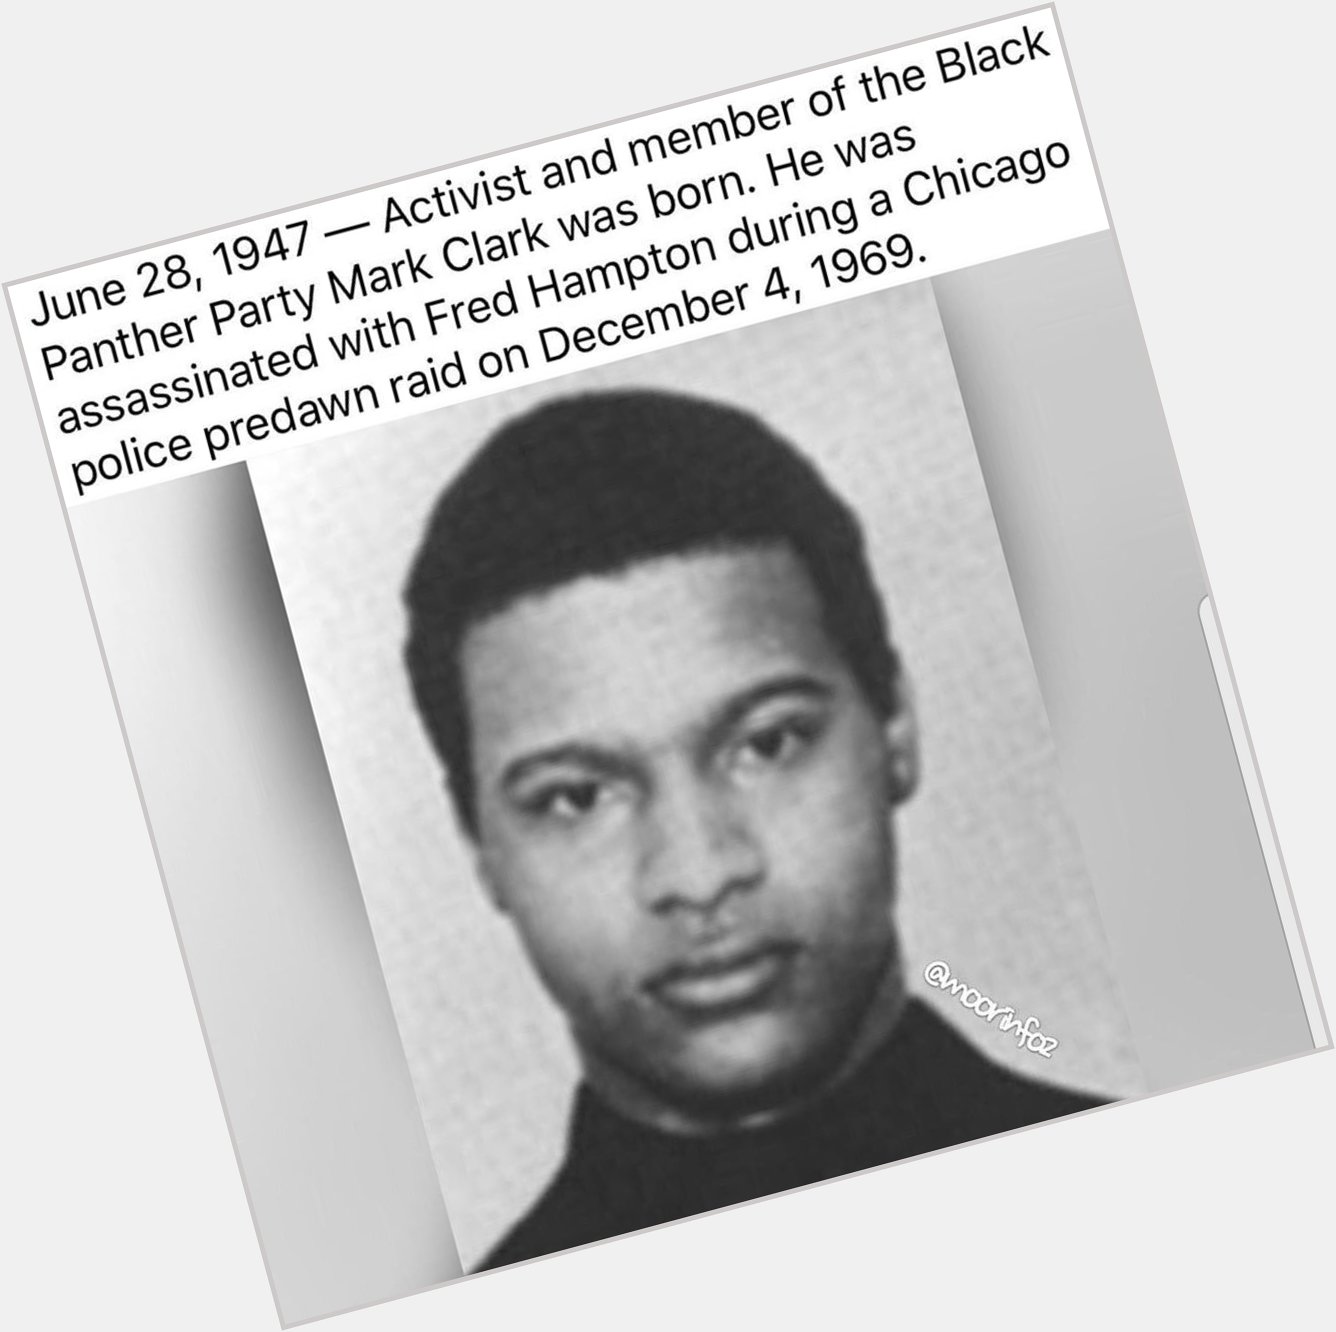 Happy birthday Mark Clark Black panther party member. 